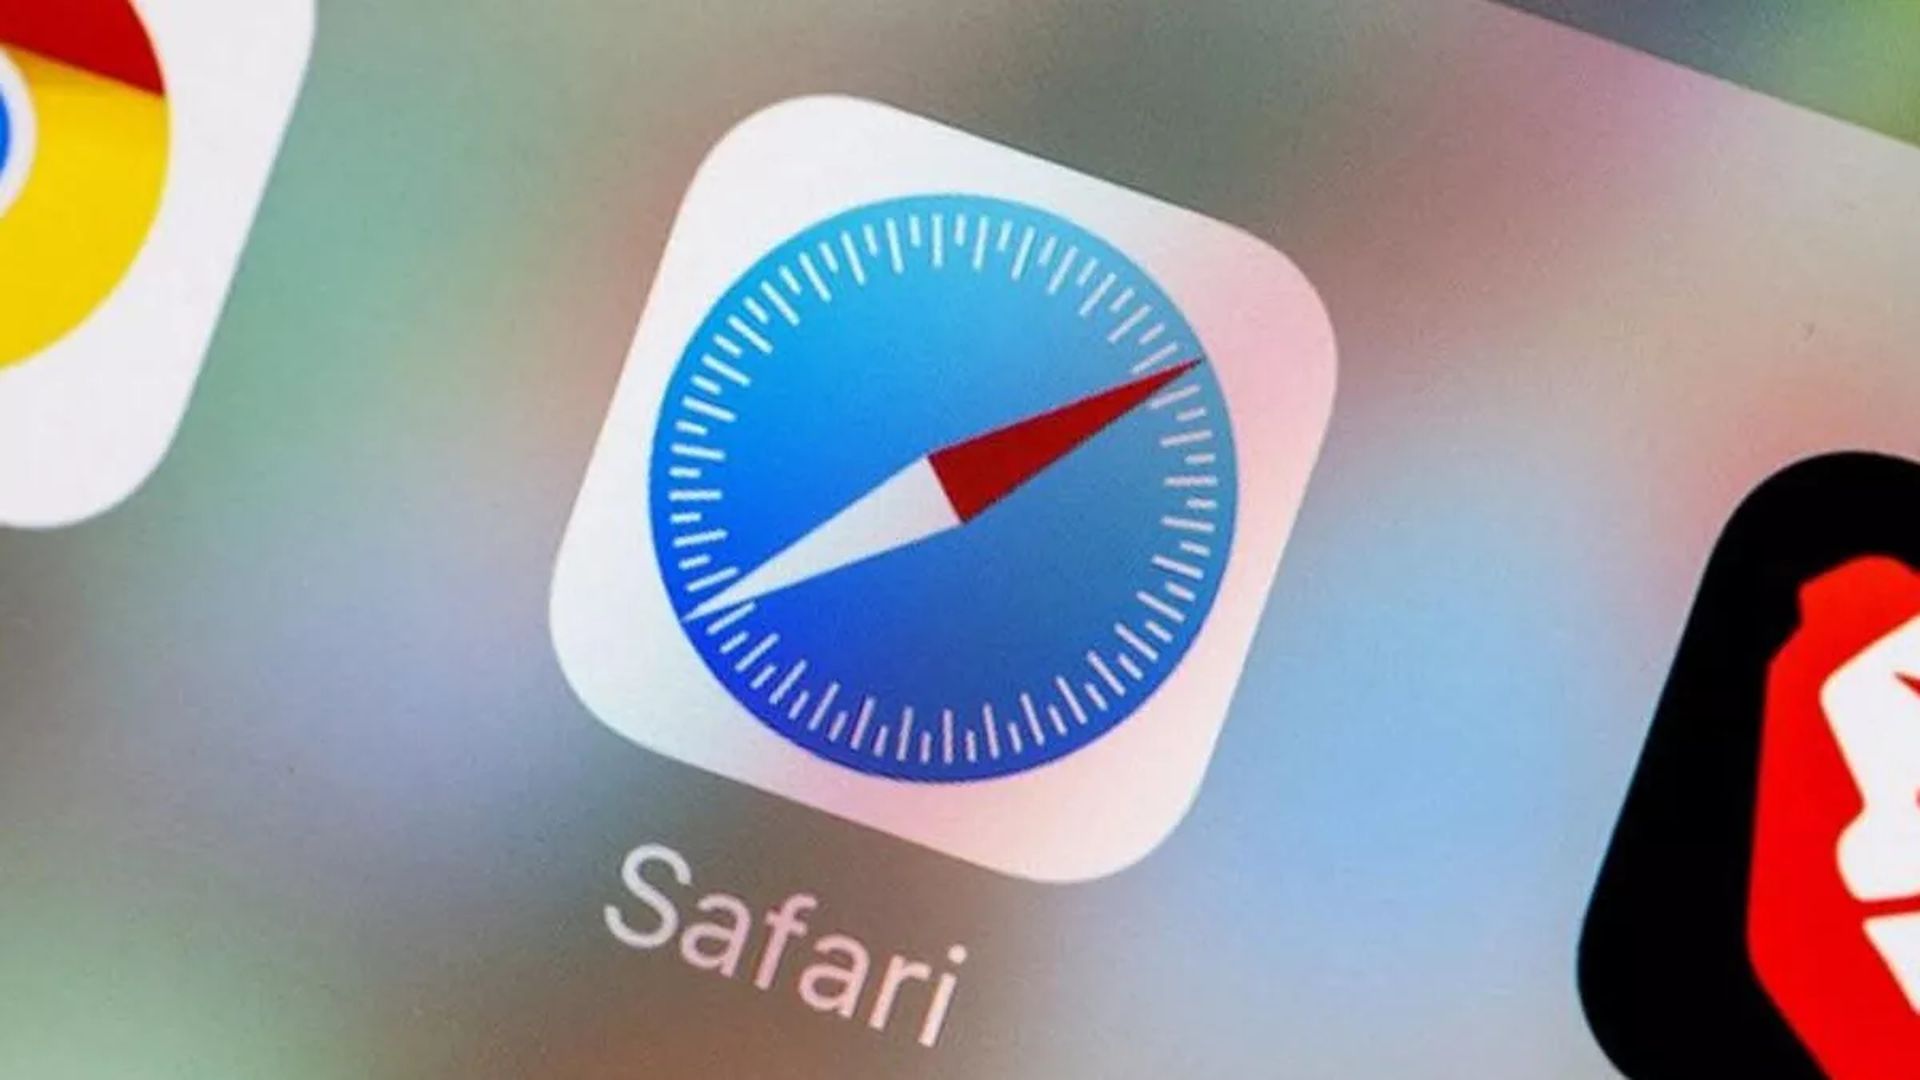 Zero-day bug has been plaguing the Apple devices in 2022 and giving hackers access, but an Apple iPhone security flaw fix was released, this time for Safari.